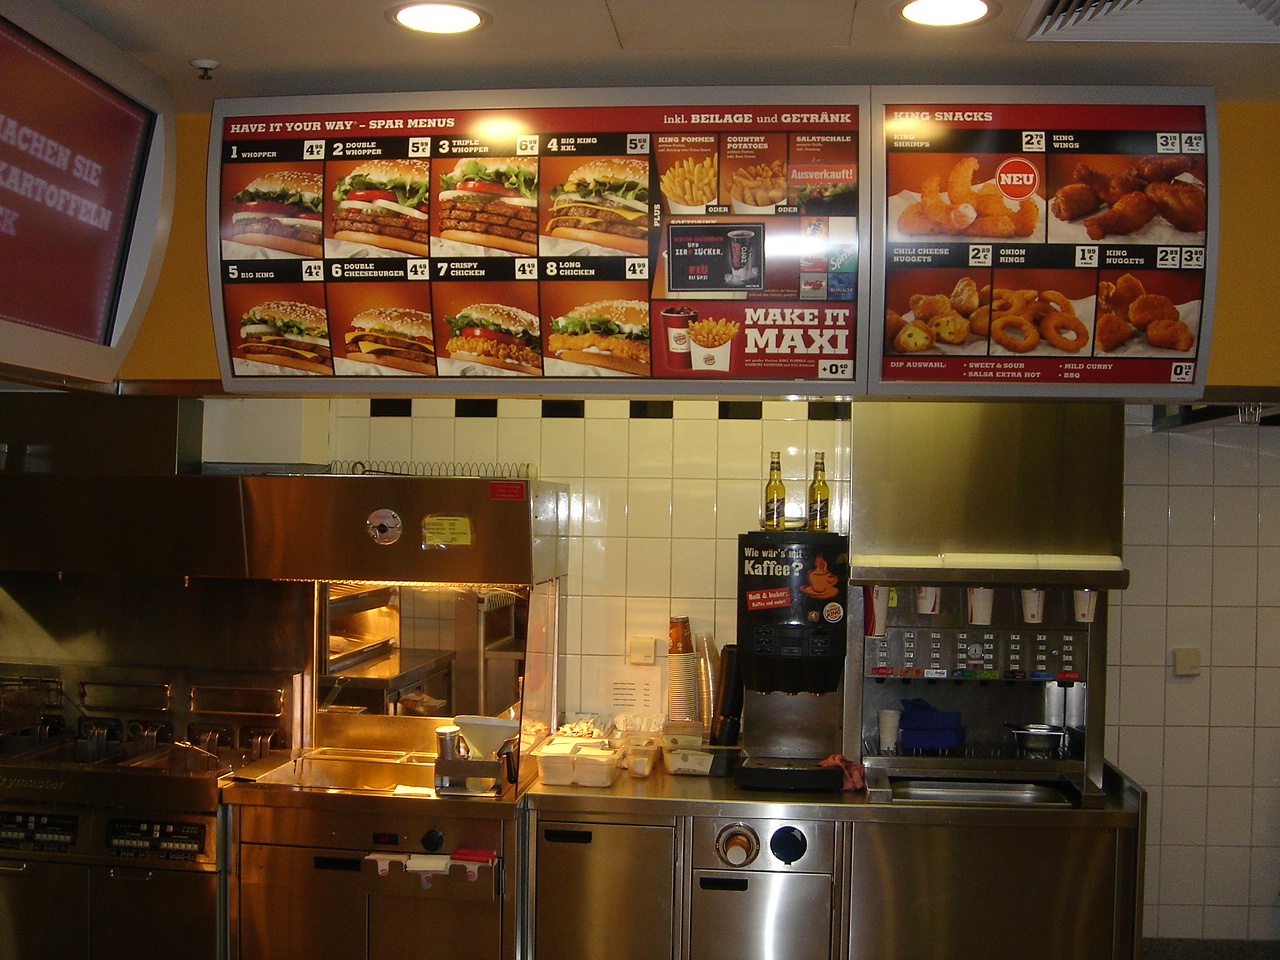 Burger King Menu Underground near Dom in Cologne, May 19, 2007